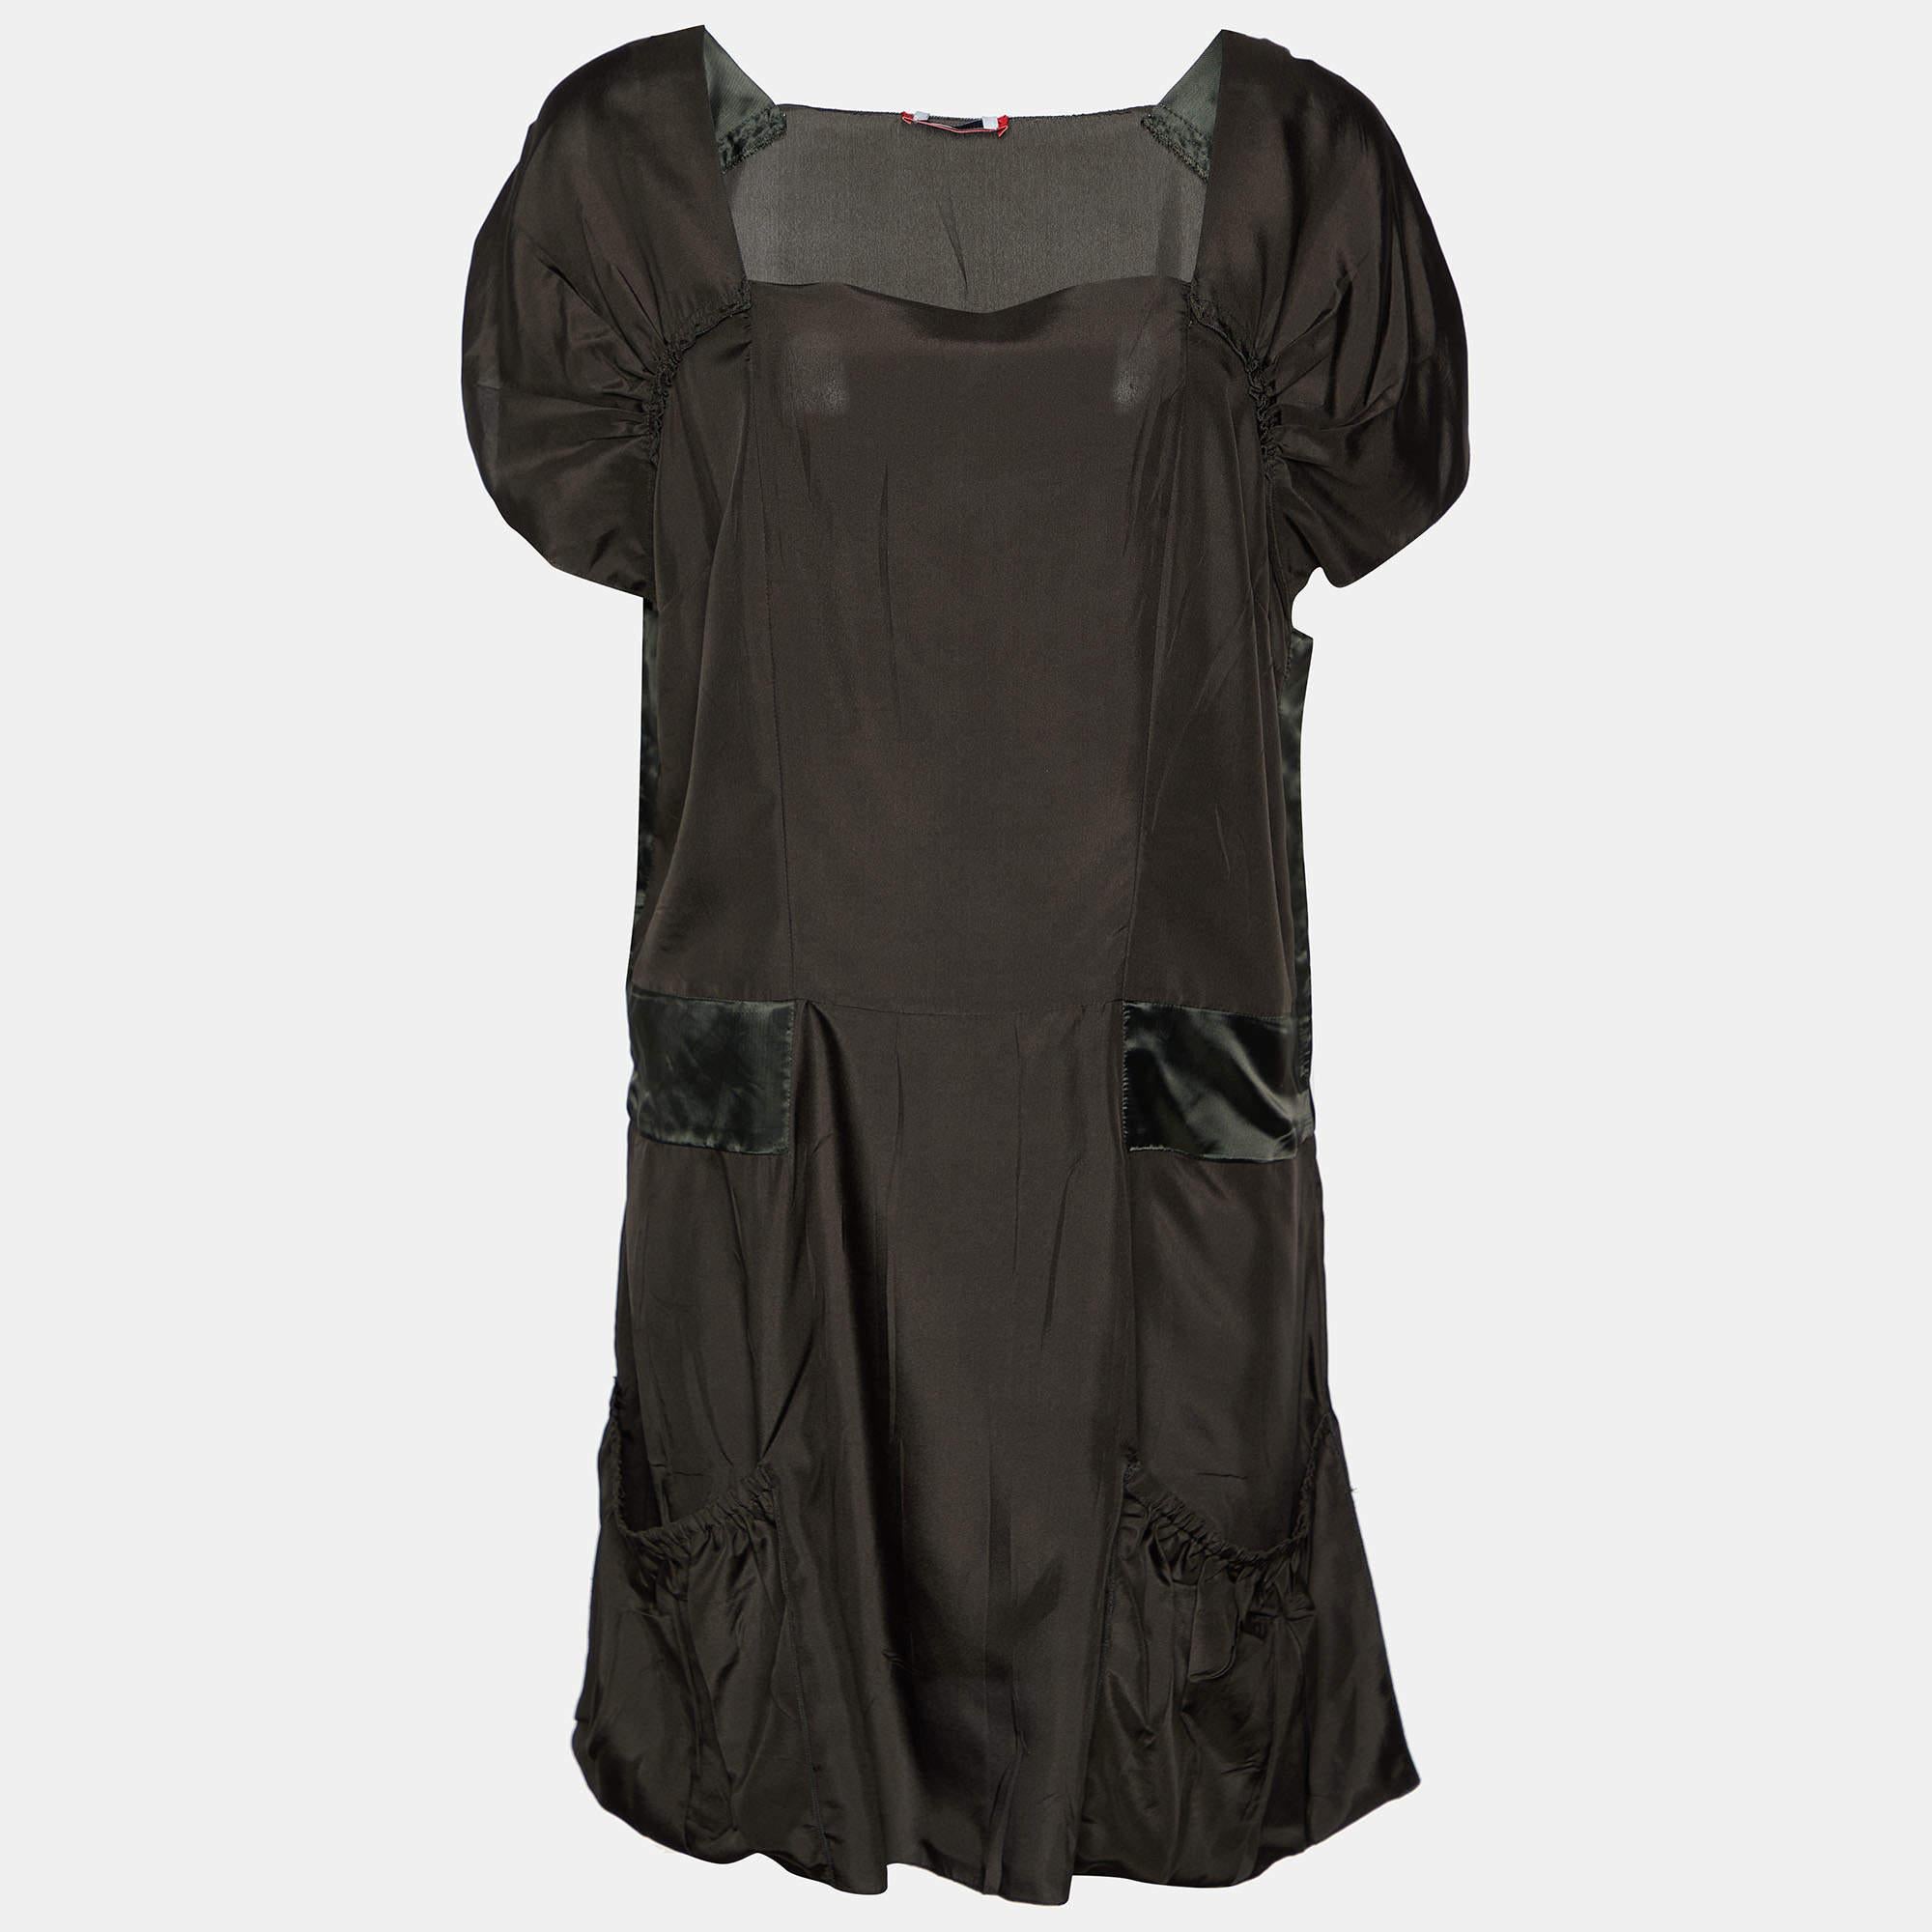 Crafted from luxurious silk, this dress features a loose, relaxed fit and a contrasting detail that adds a touch of contemporary elegance. Perfect for both daytime and evening occasions, it effortlessly combines comfort and style for the modern